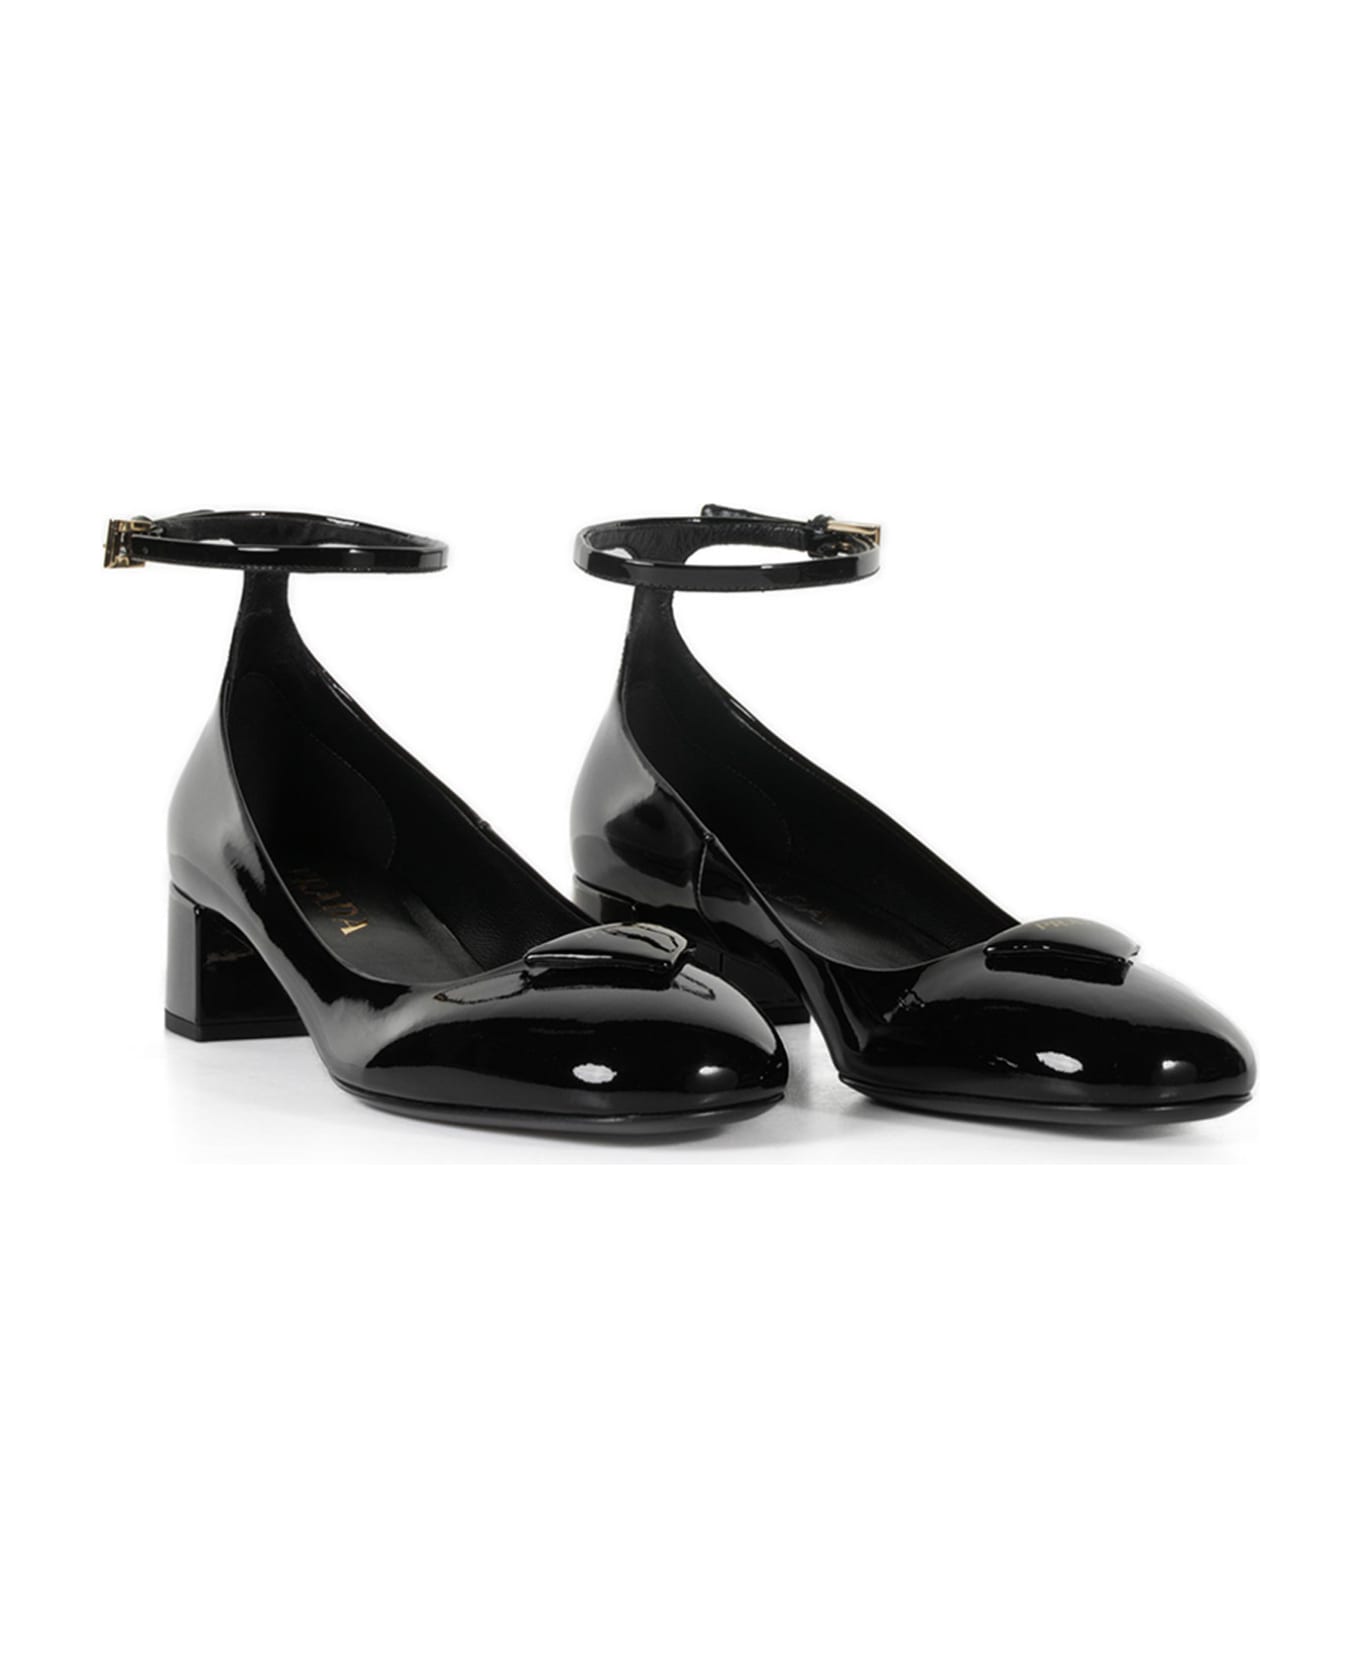 Prada Leather Pumps With Logo And Strap - NERO ハイヒール